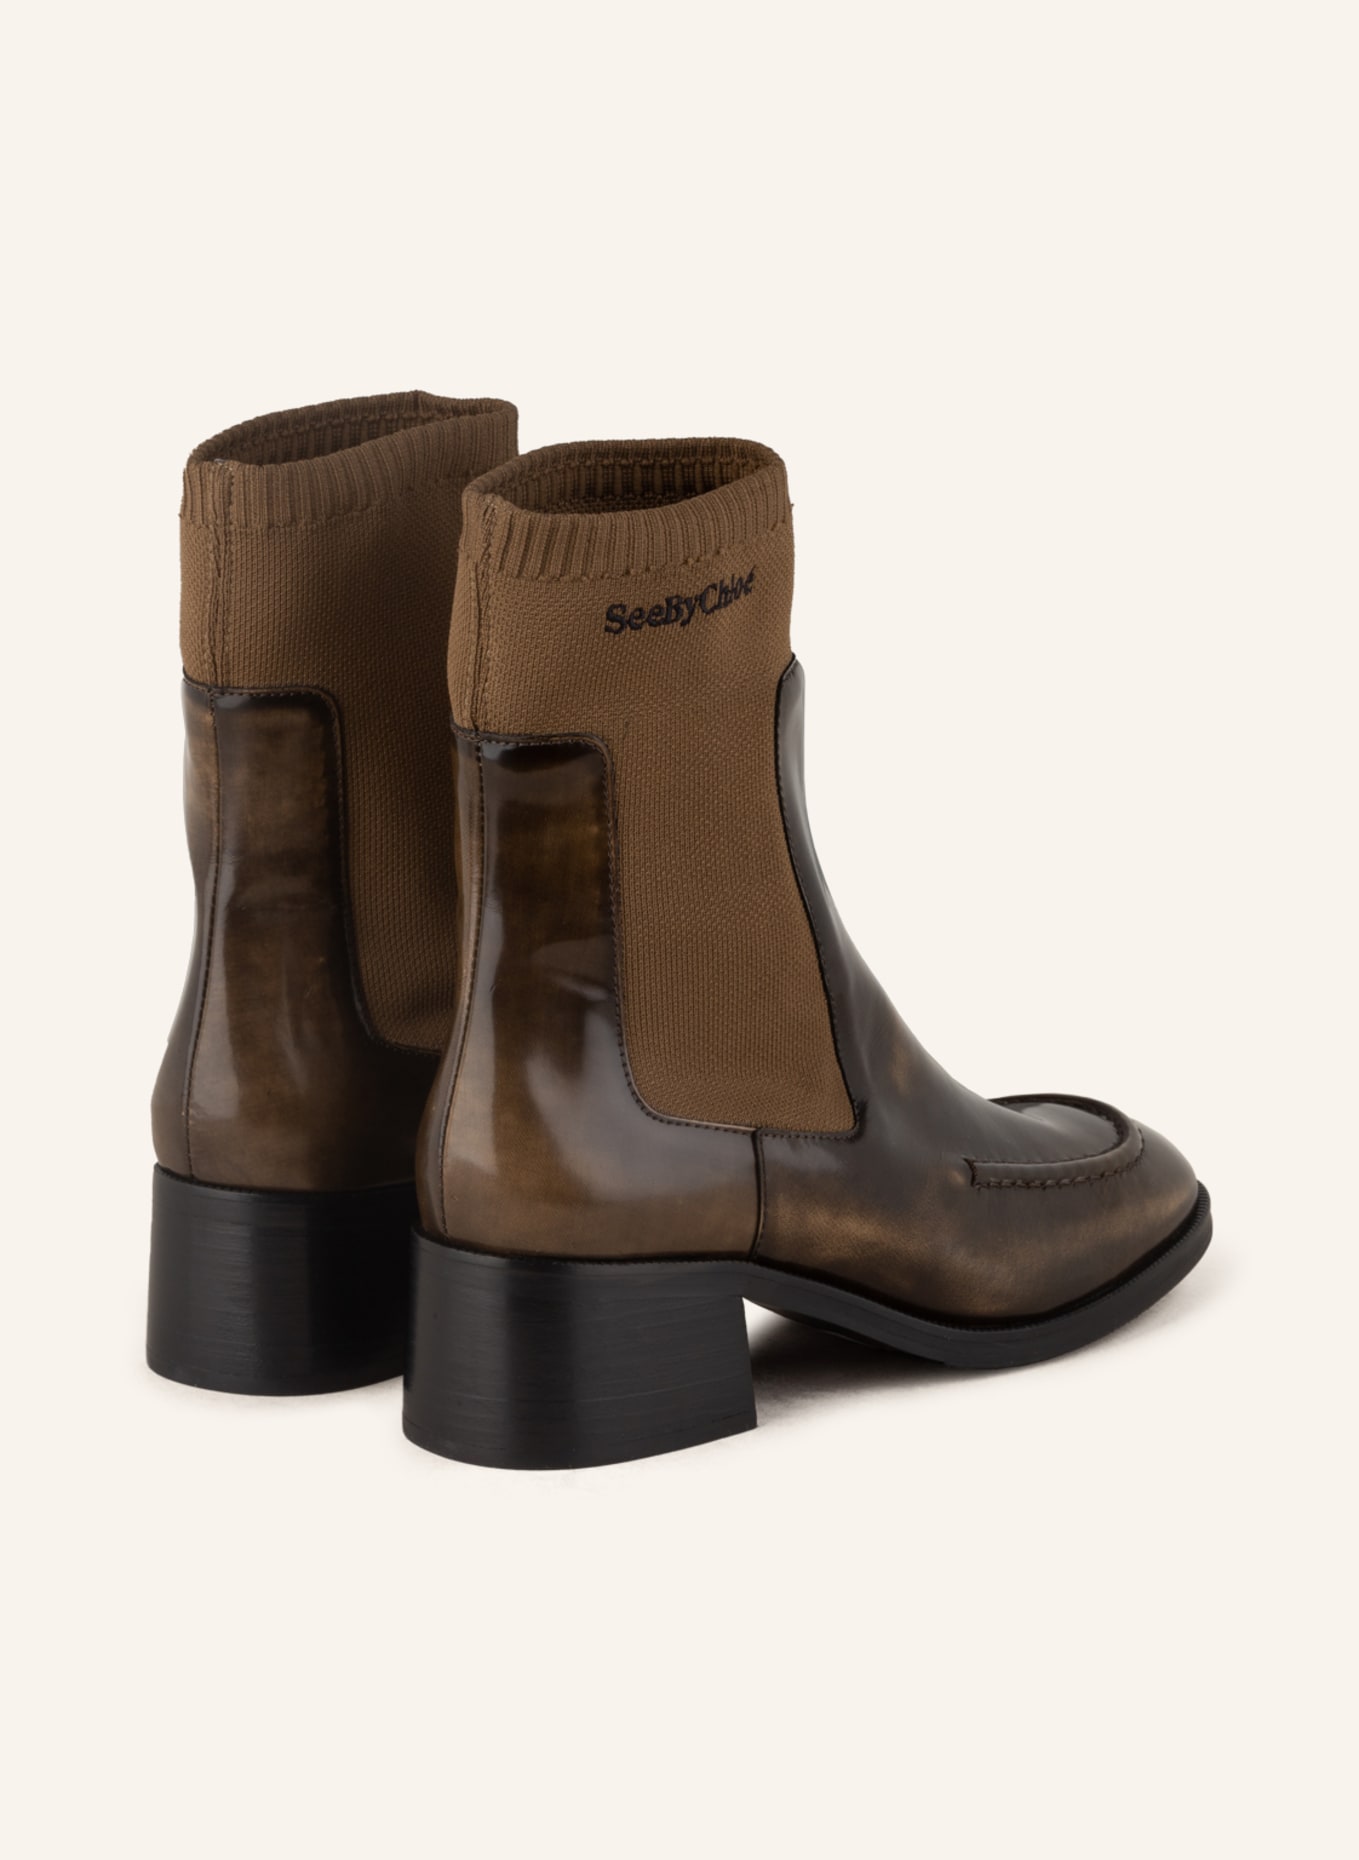 SEE BY CHLOÉ Chelsea-Boots WENDY, Farbe: 110/415 Olive (Bild 2)